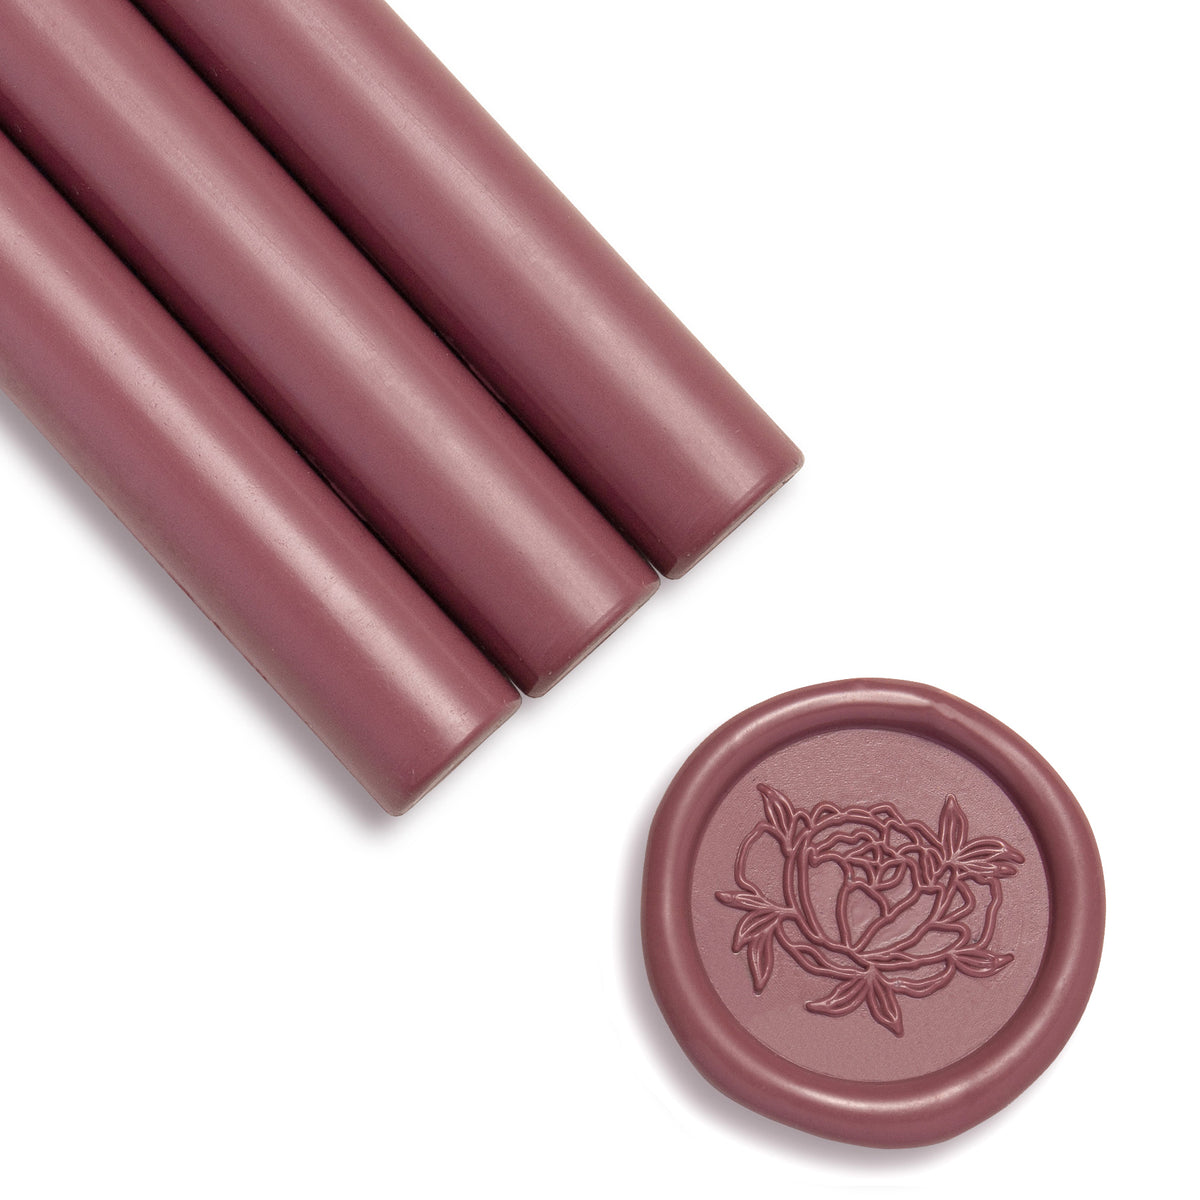 UNIQOOO Mailable Glue Gun Sealing Wax Sticks for Wax Seal Stamp - Mauve  Dusty Lilac Purple, Great for Wedding Invitations, Cards Envelopes, Snail